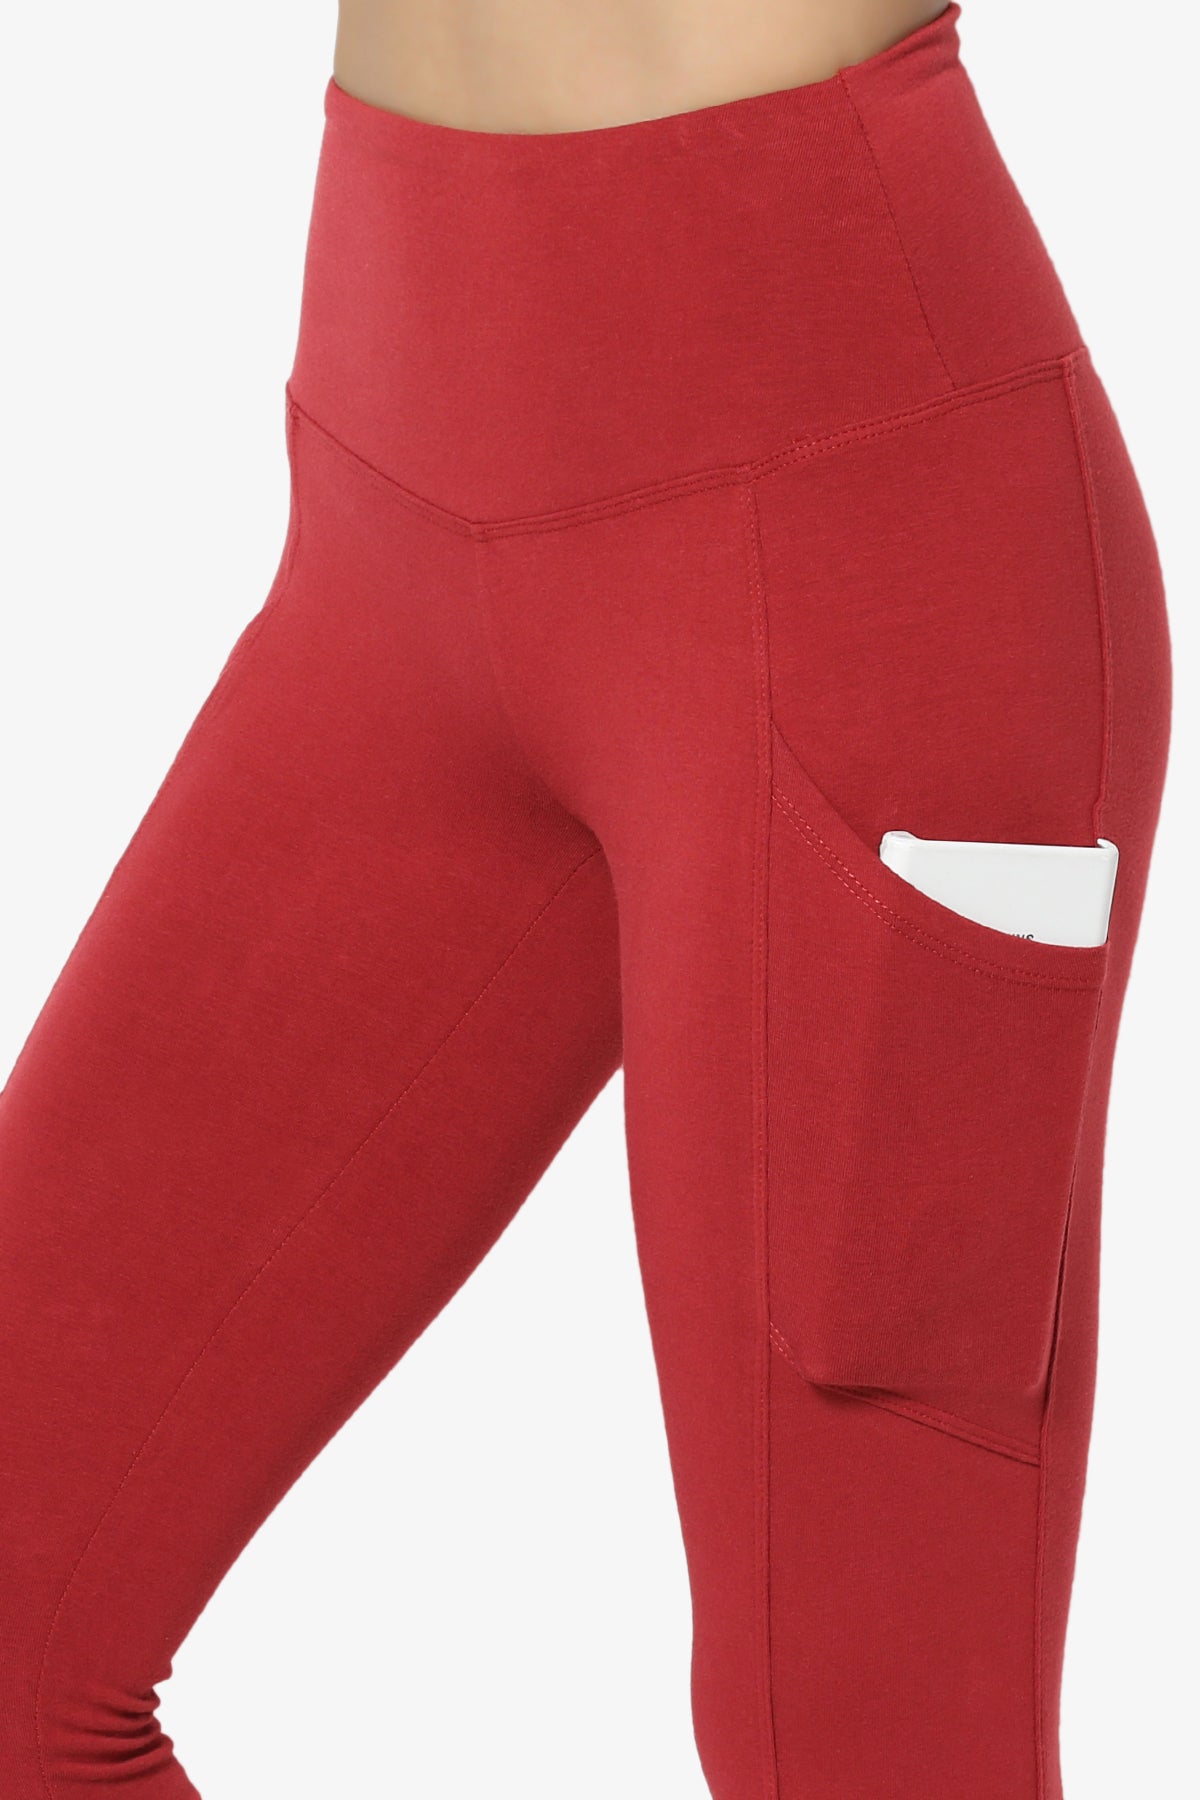 Ansley Luxe Cotton Leggings with Pockets DARK RED_5